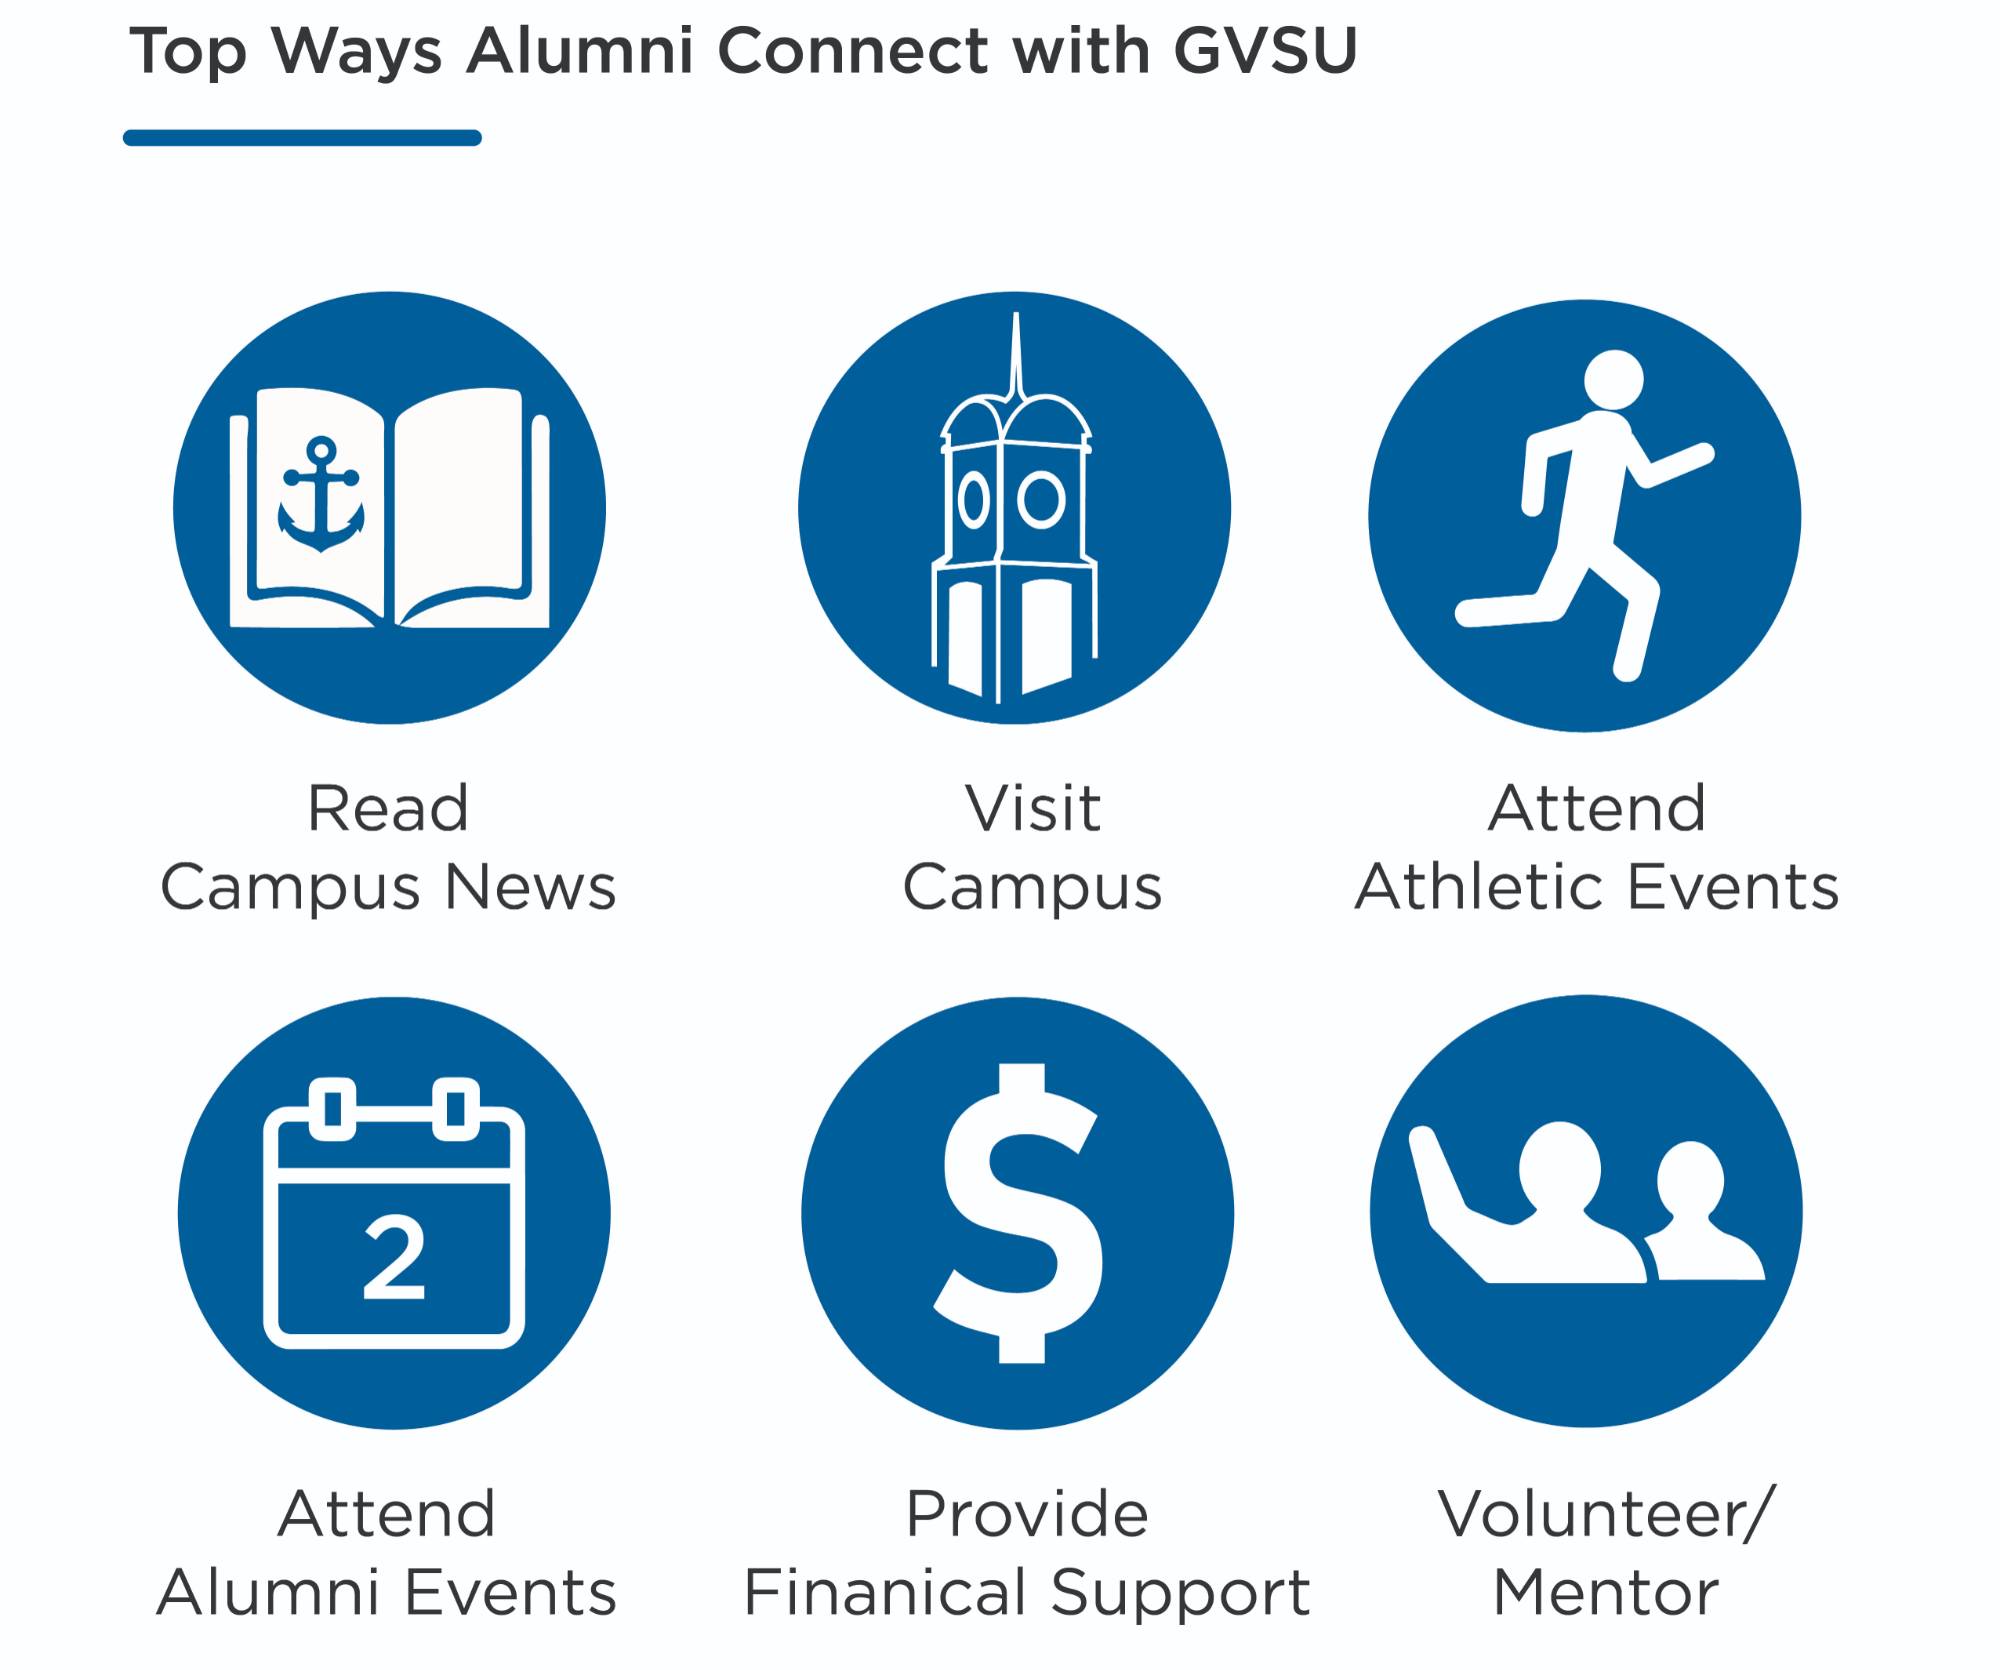 Top Ways Alumni Connect with GVSU. Image of a magazine with an anchor on it. Reading Campus News. Image of the Cook Carillon Tower. Visiting Campus. Image of a person running. Attending Athletic Events. Image of a calendar. Attending Alumni Events. Image of a American dollar symbol. Providing financial support. Image of a person waving. Volunteering or mentoring.